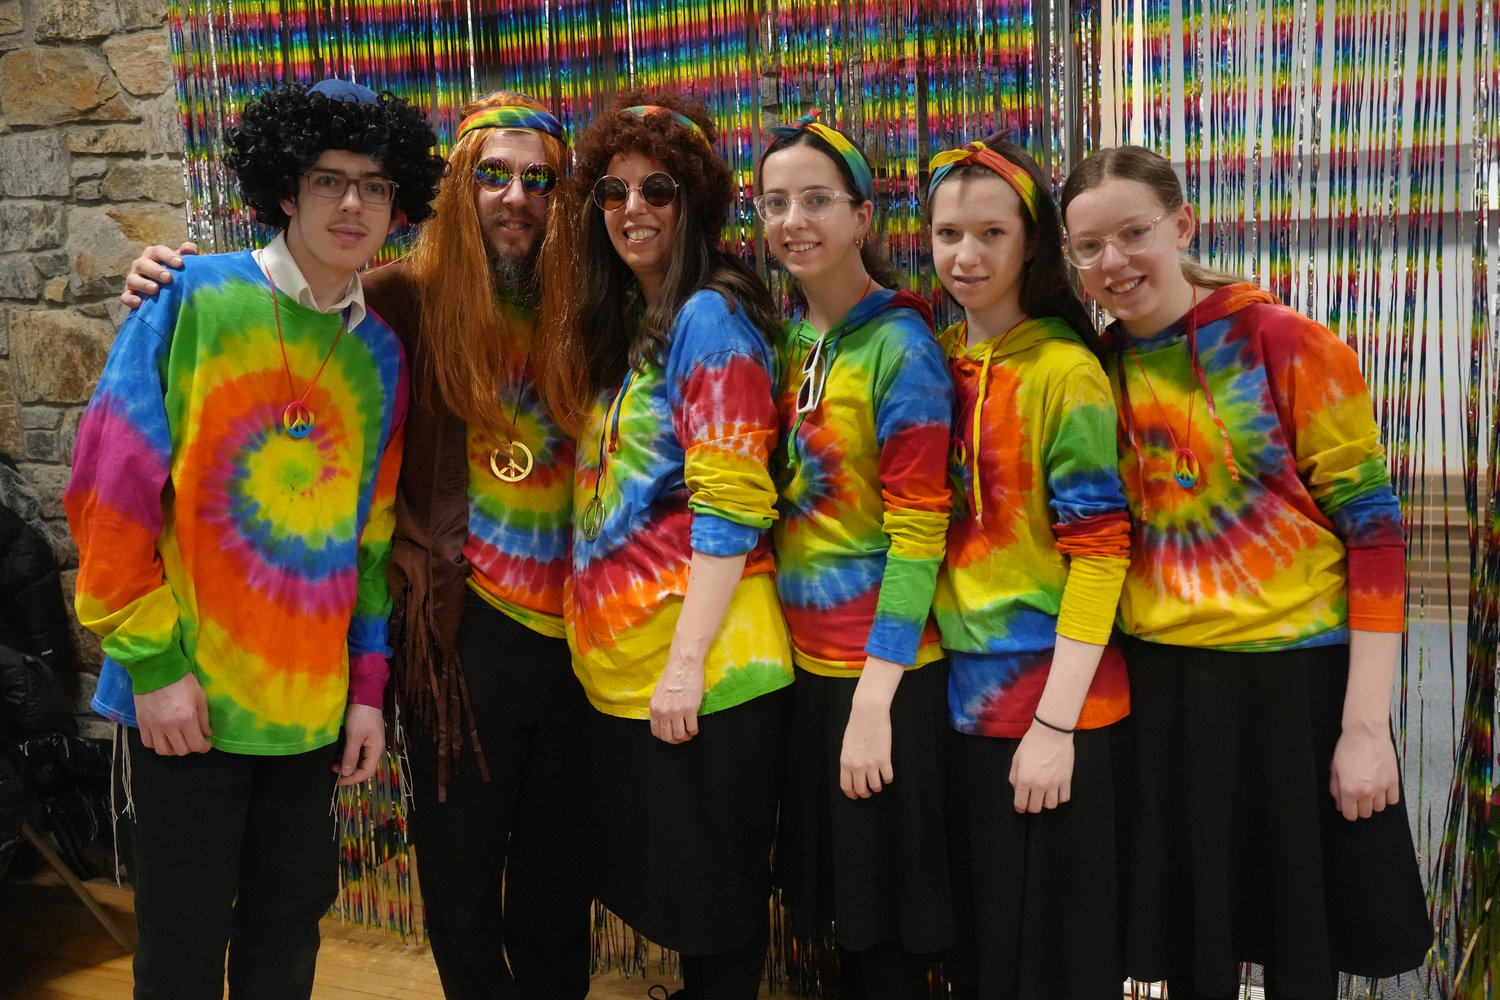 Rabbi Shimon Kramer, and his wife Chanie, with their kids, from left, Leibel, Mirel, Leah and Sarah. Each came dressed in 60’s apparel to celebrate the festive night.